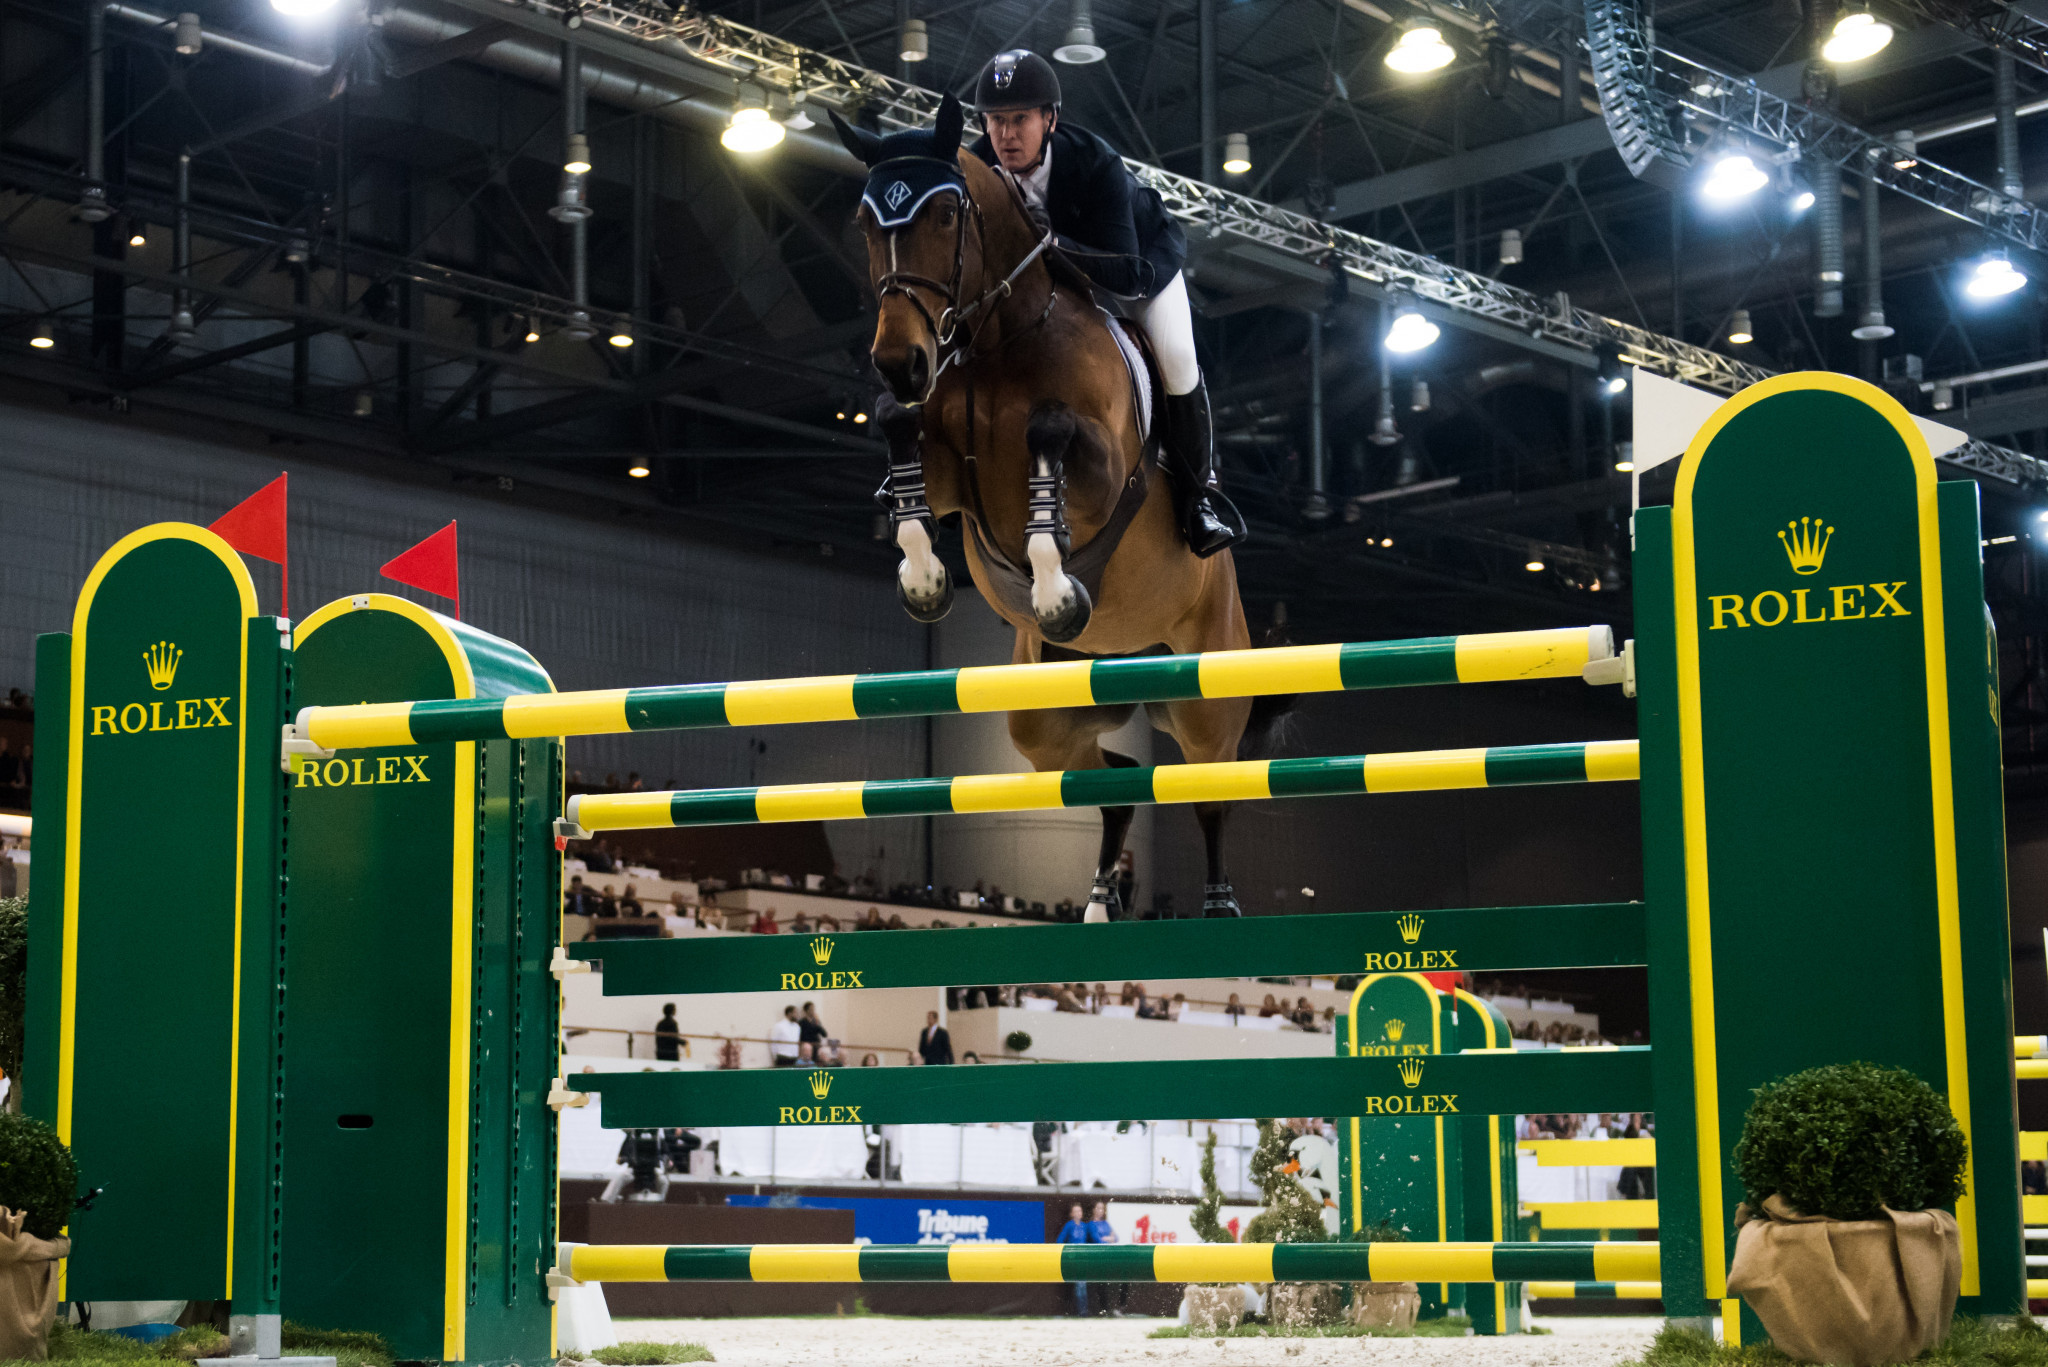 HH Azur, the mare ridden by America's McLain Ward, has been voted the World’s Best Jumping Horse by the FEI ©Getty Images